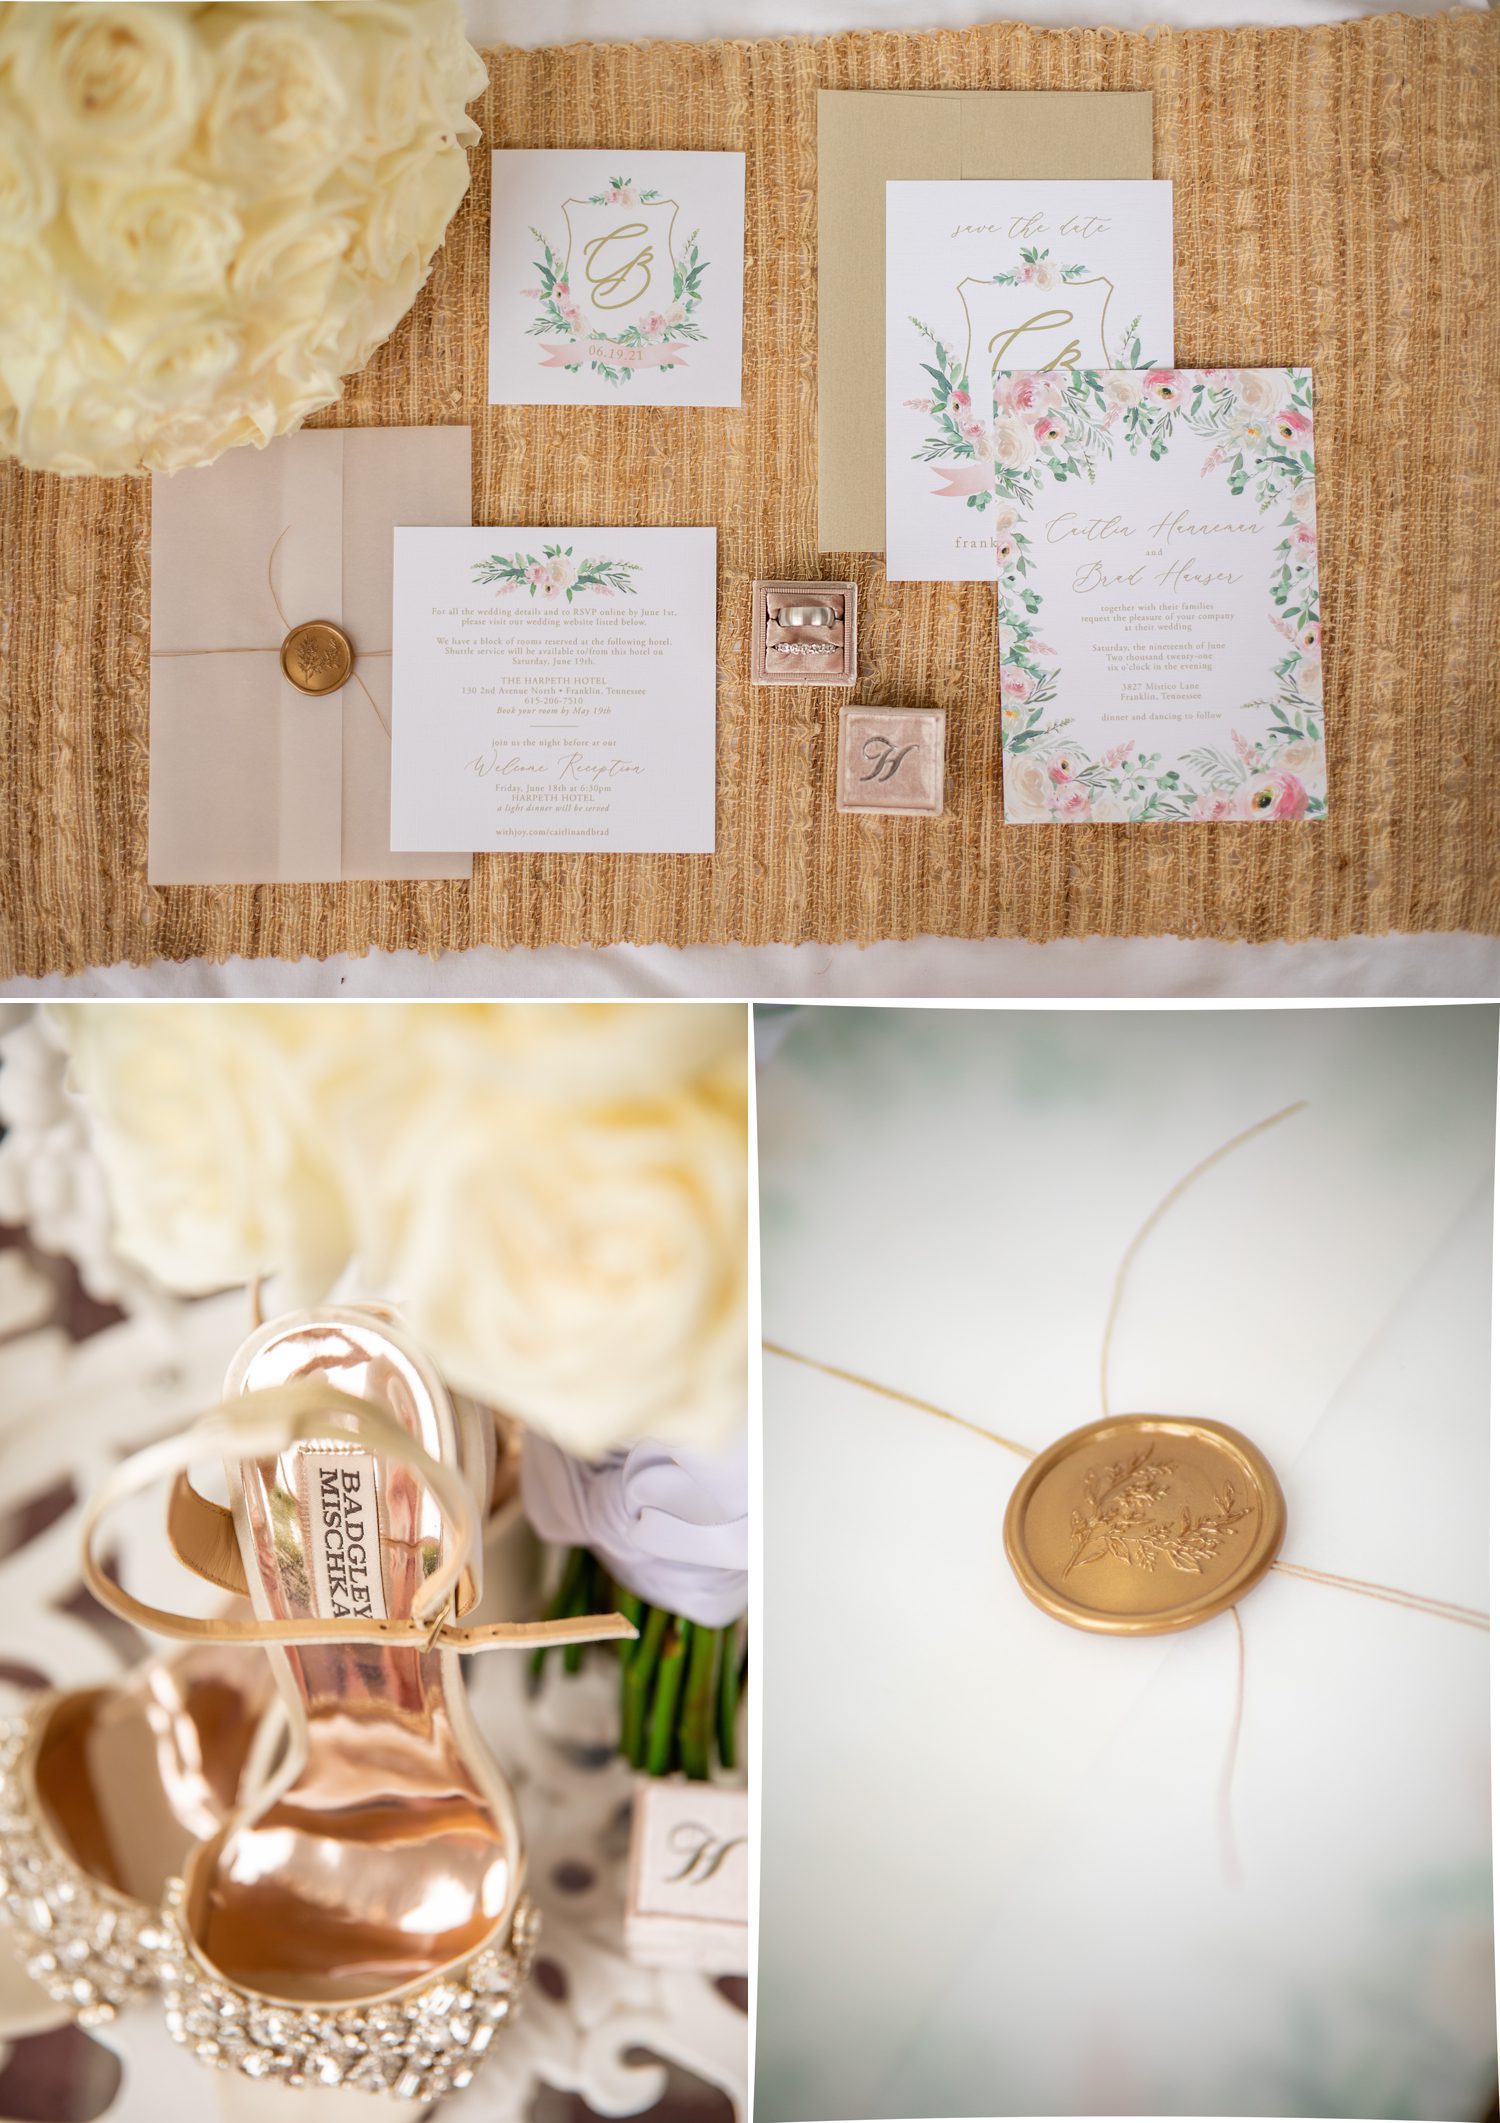 Private Estate Wedding Franklin, TN Invitation Suite with Wax Seal Badgley Mischka Bridal Shoes